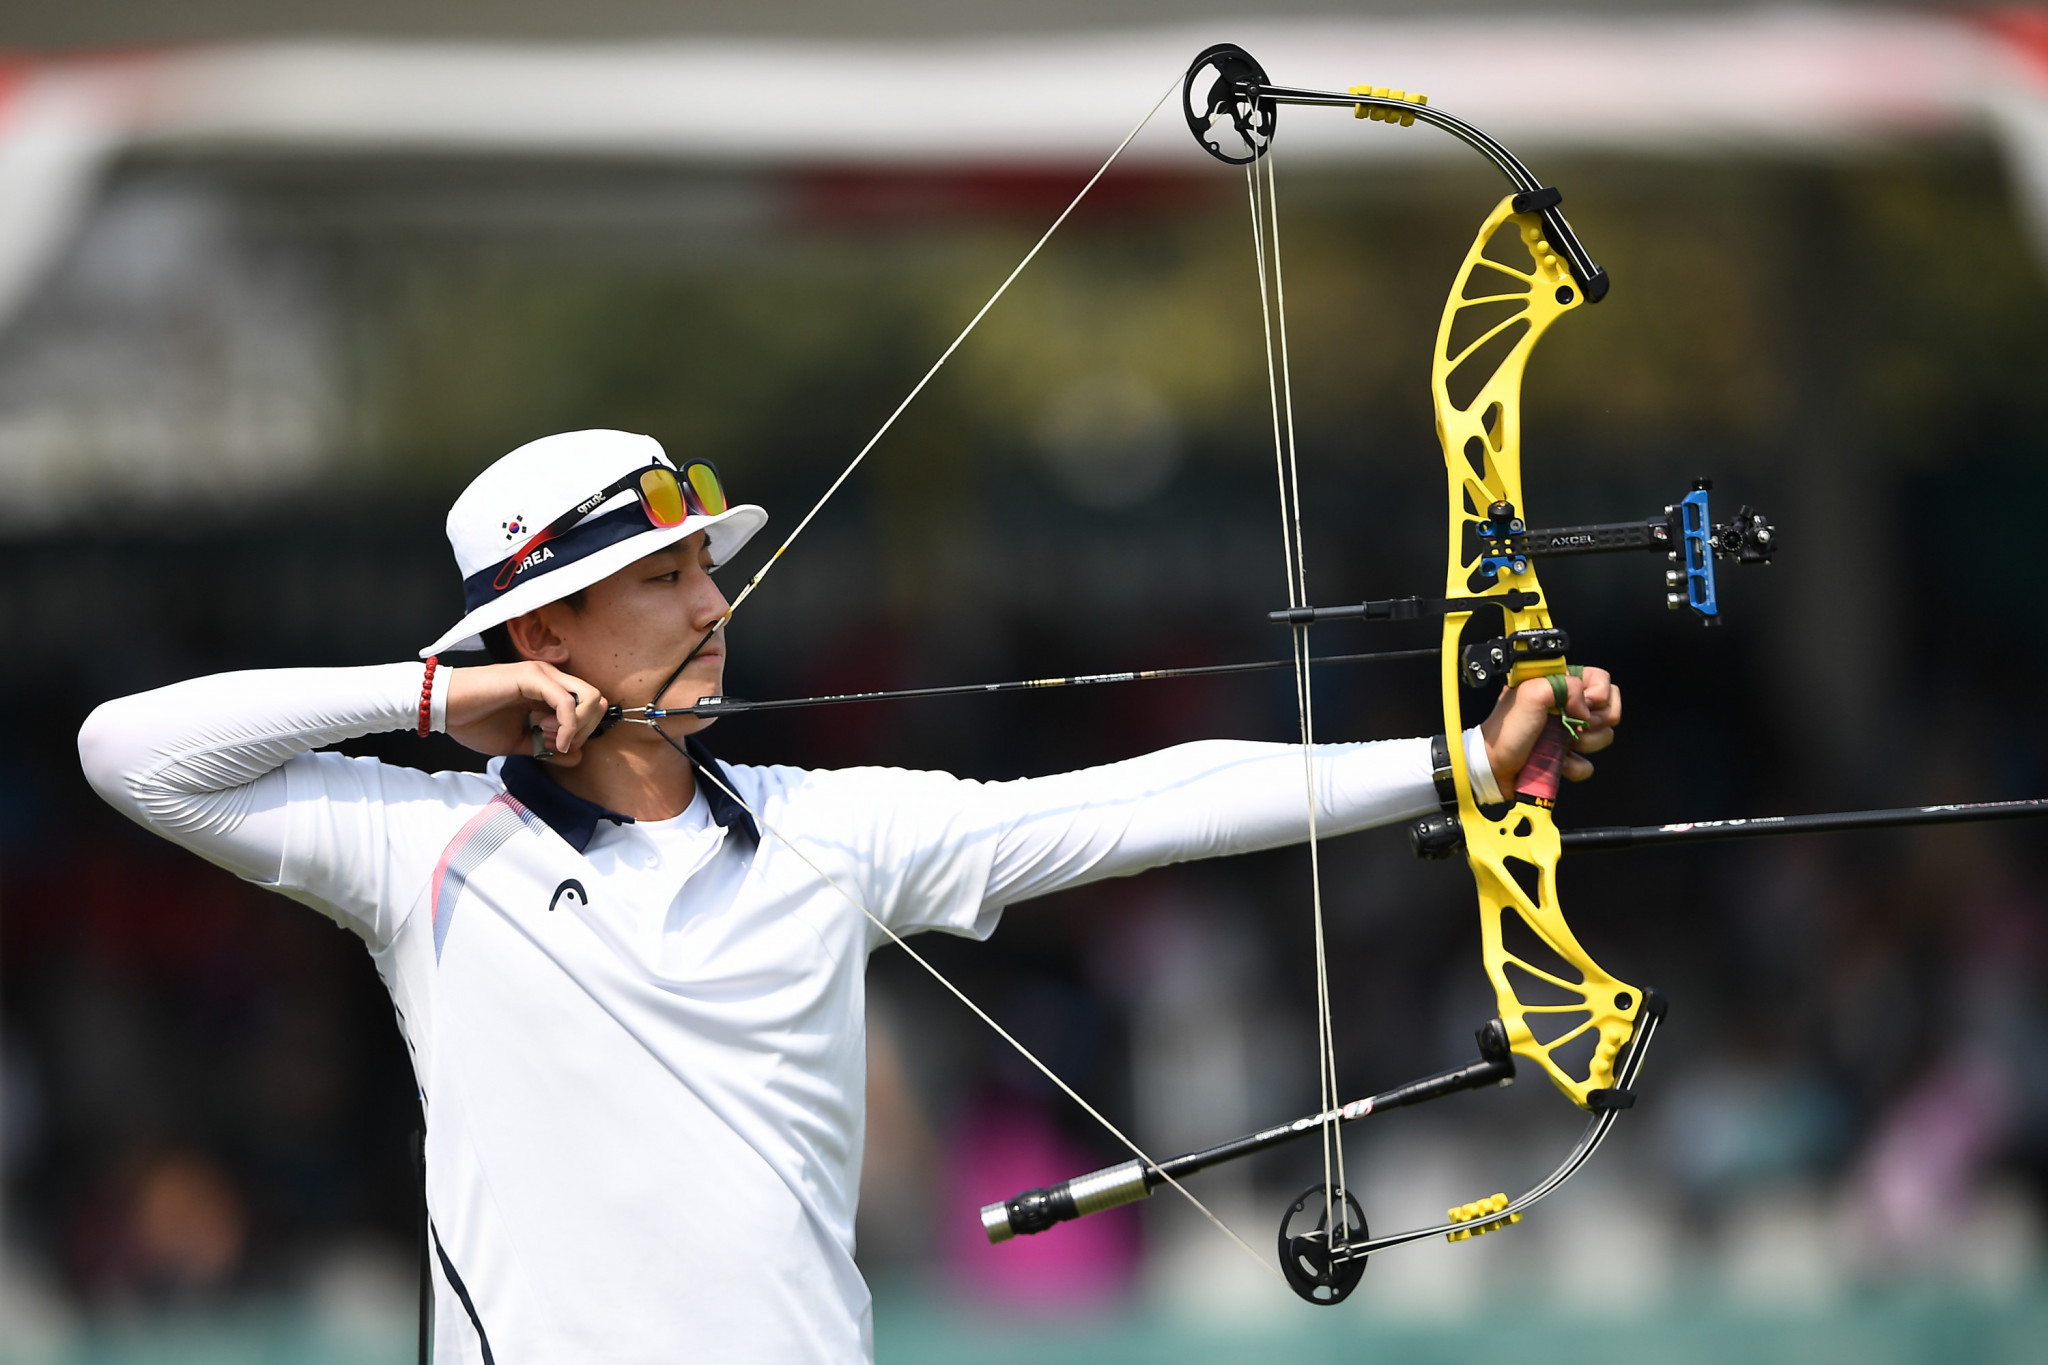 archery olympic games tokyo 2020